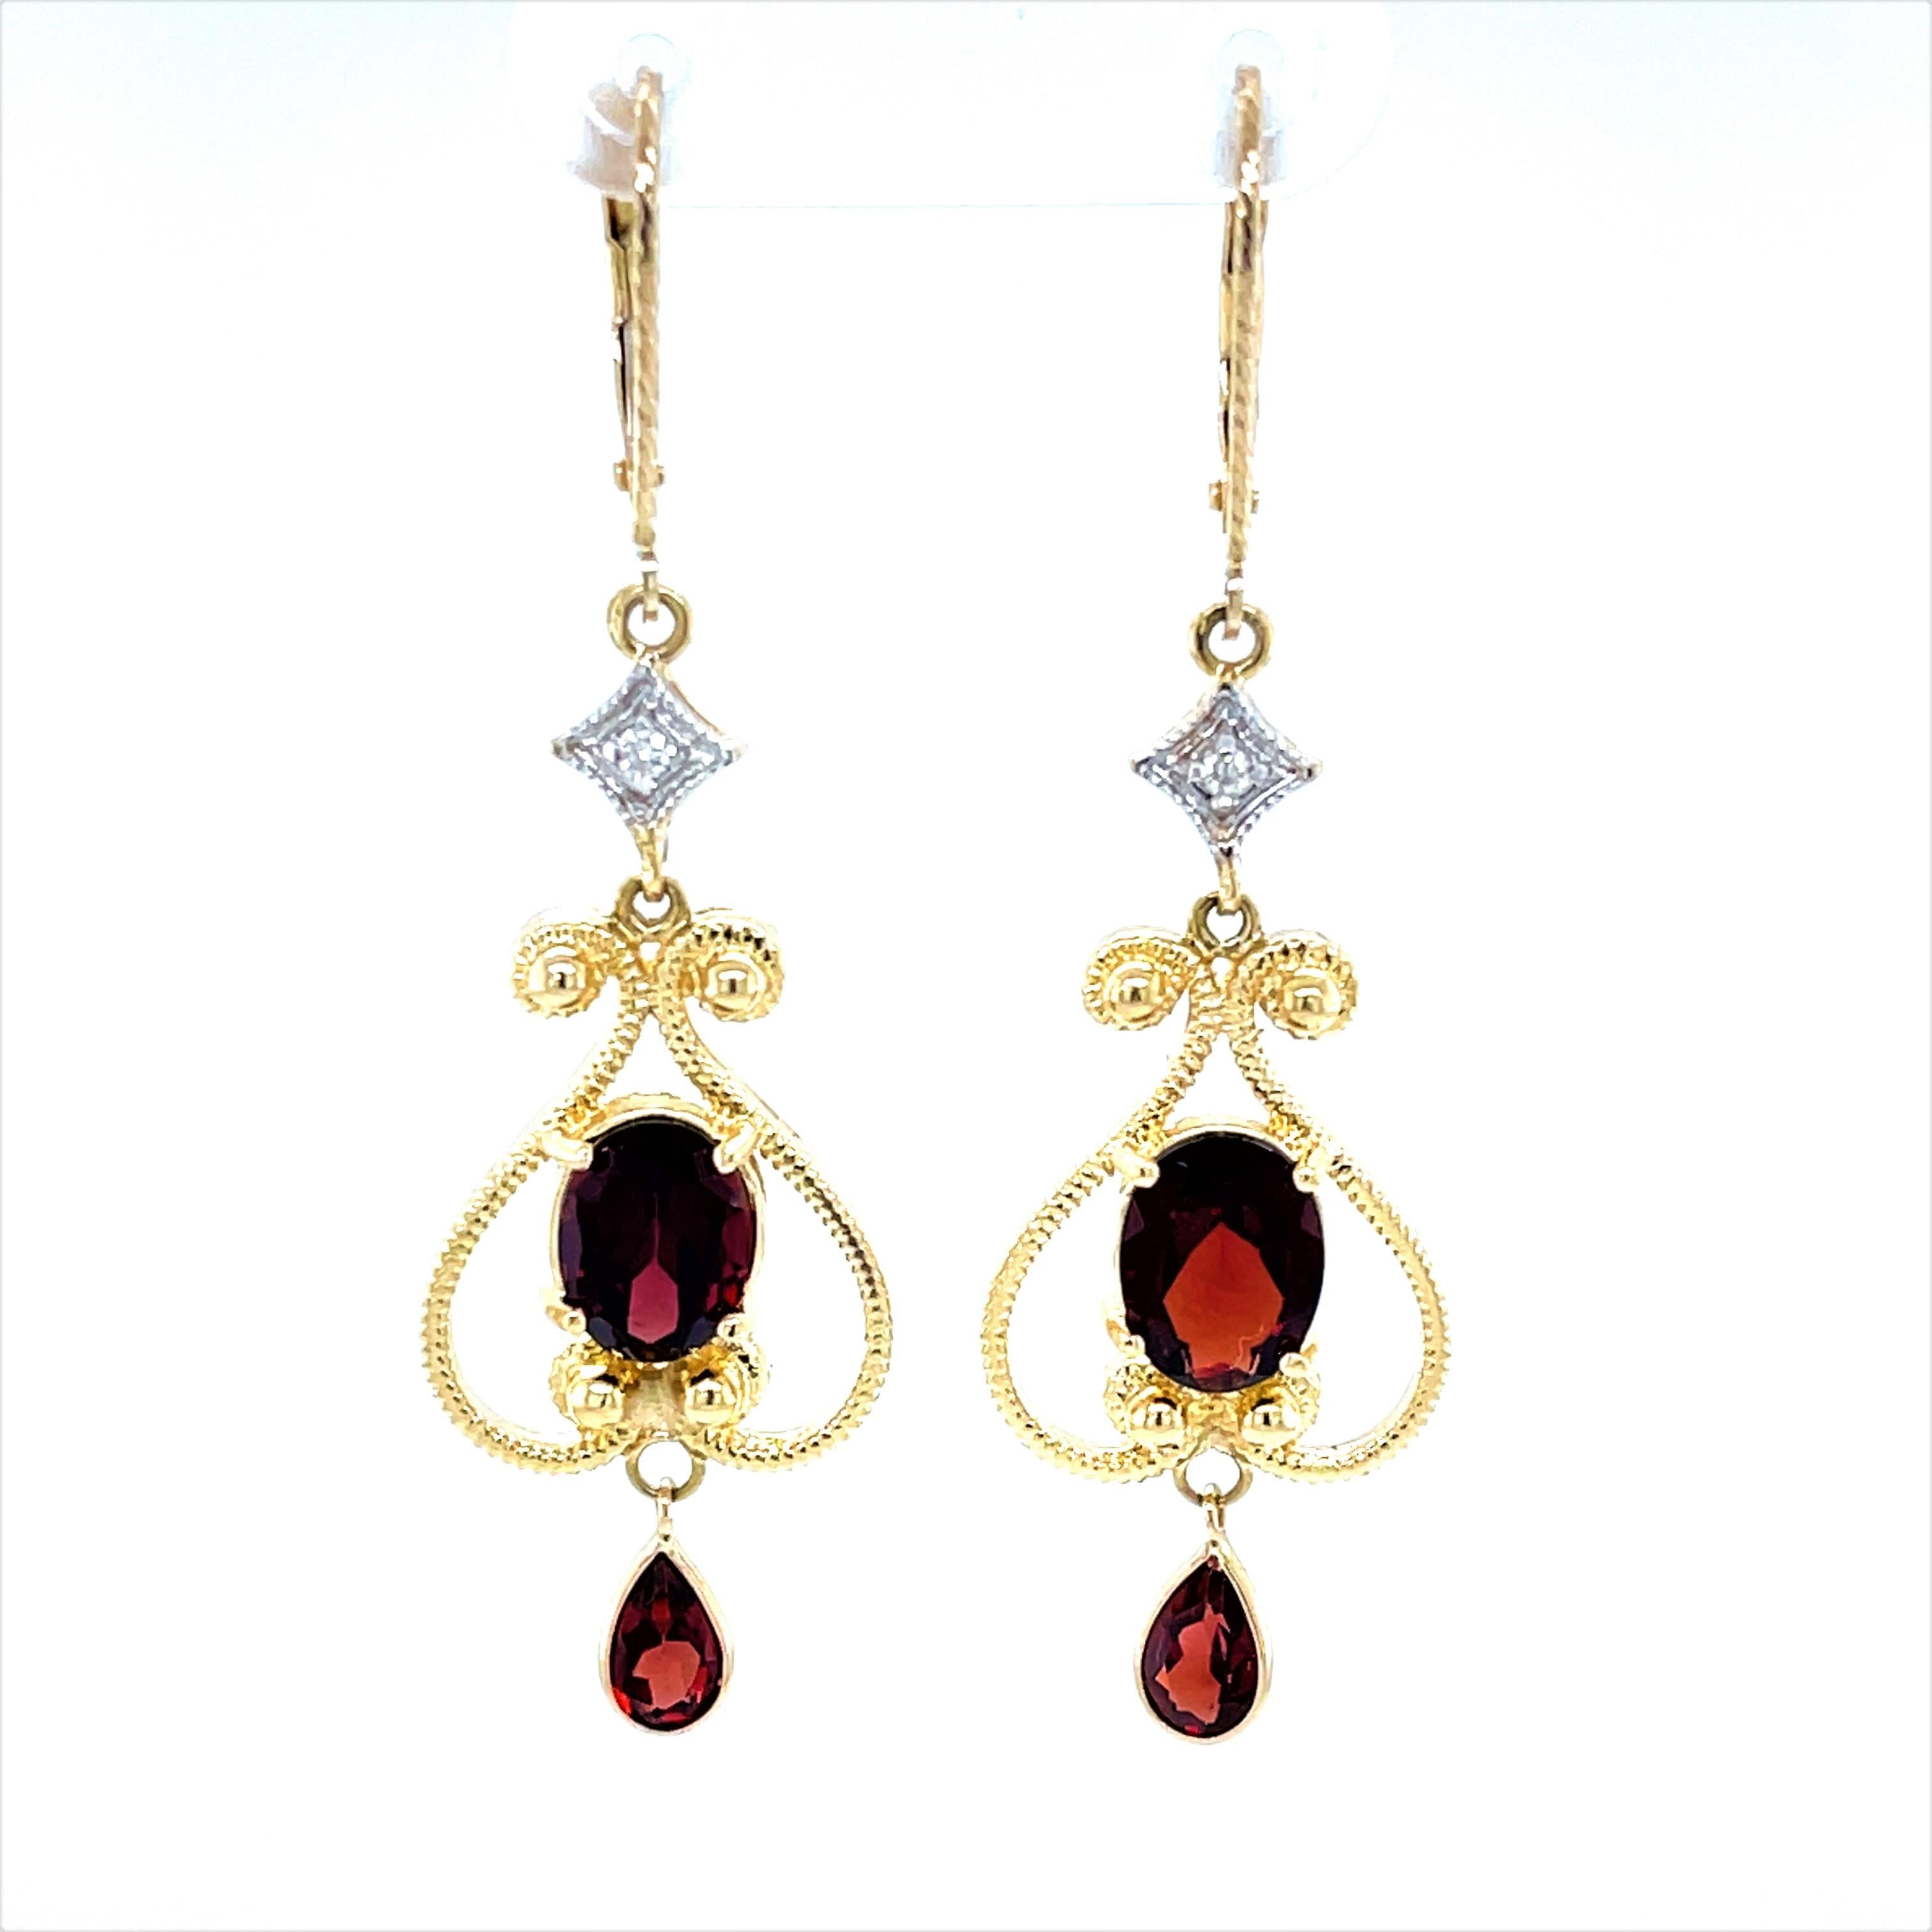 Garnet Diamond Accented Victorian Style 14 Karat Yellow Gold Dangle Earring In Excellent Condition For Sale In Mount Kisco, NY